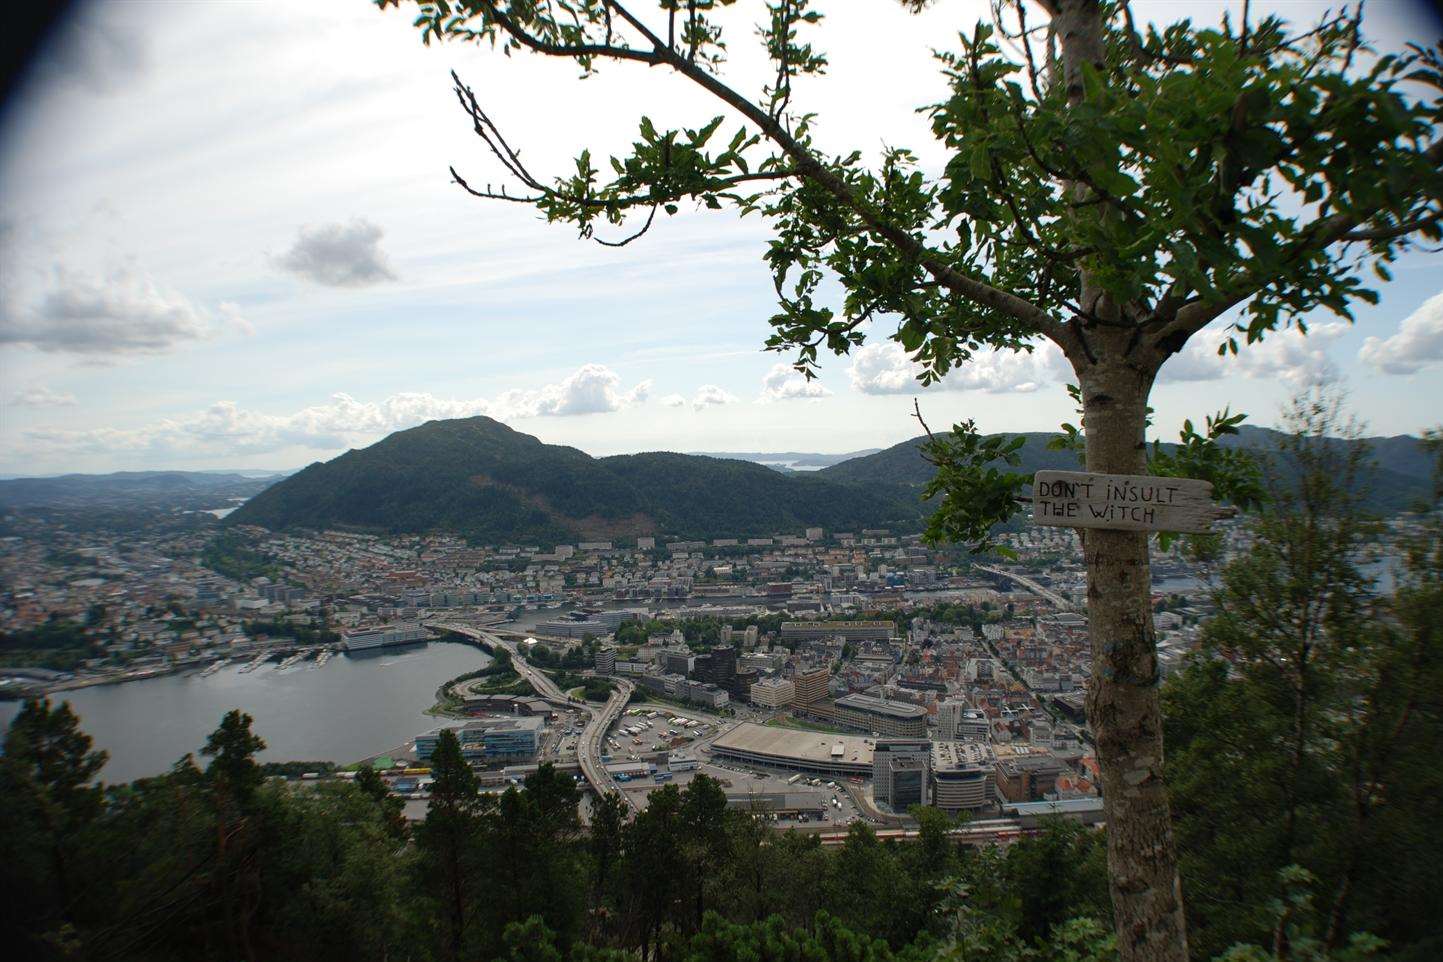 The whole of Bergen can be seen from the mountain top